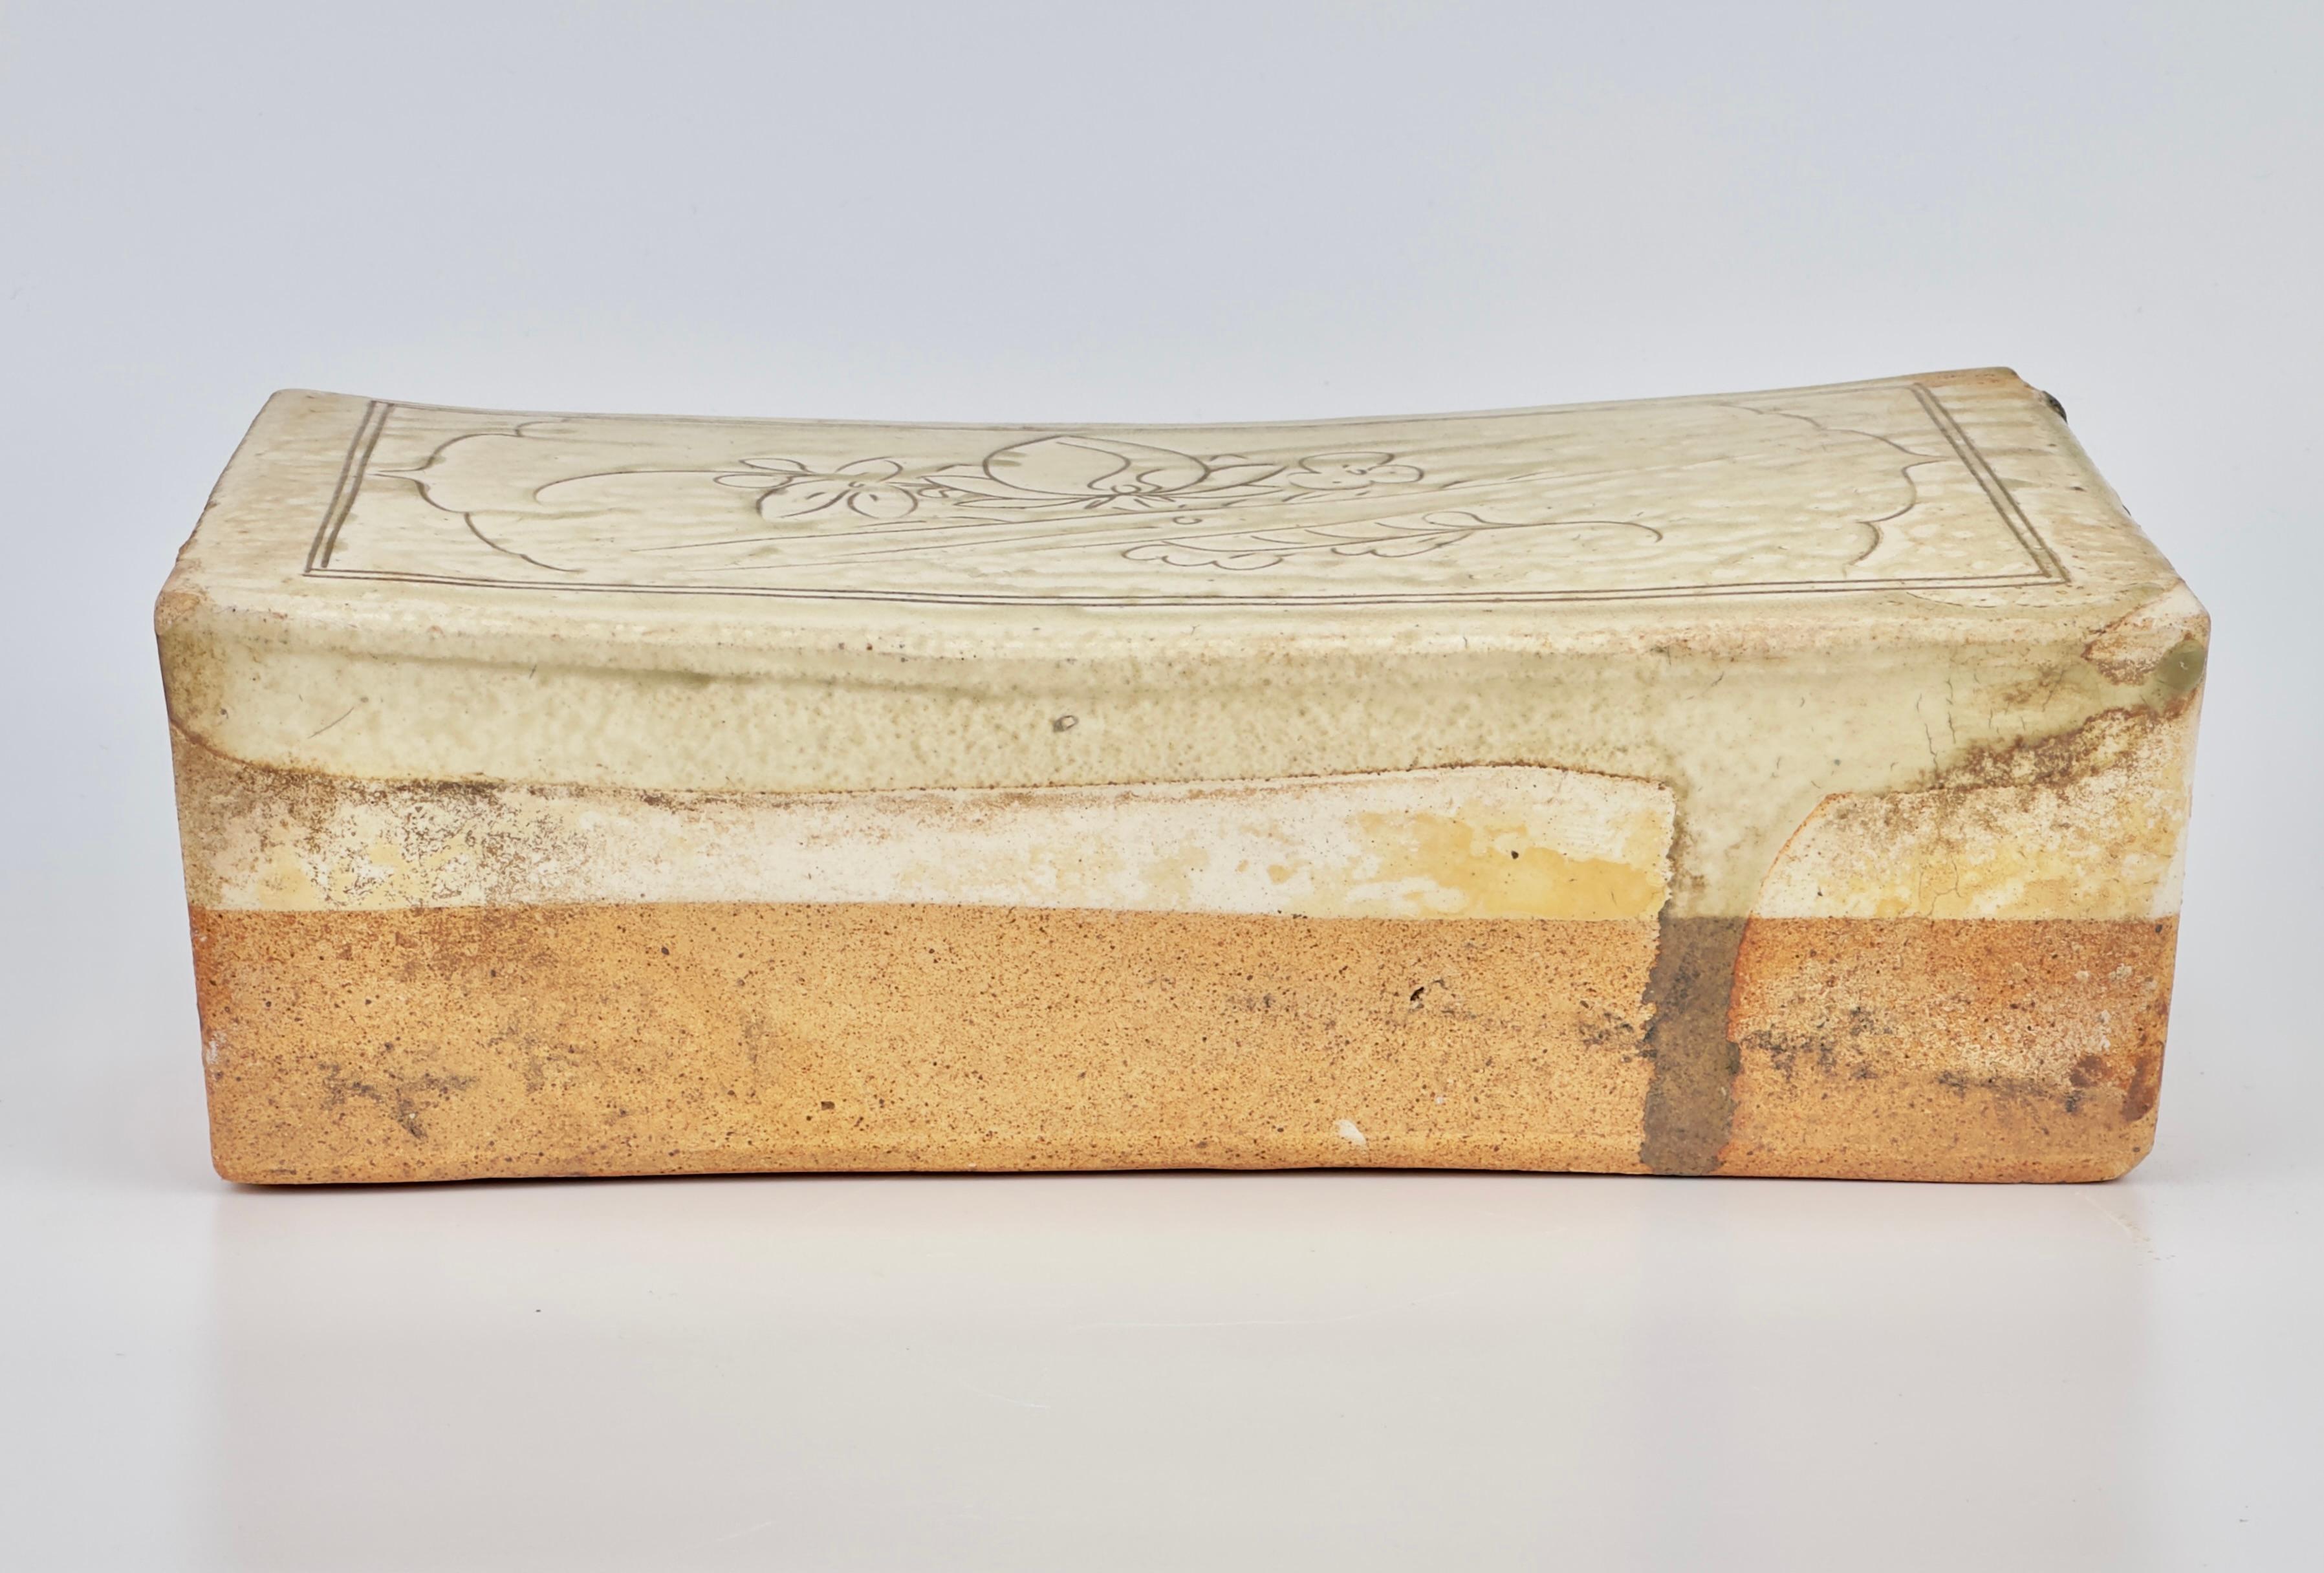 Cizhou Rectangular Pillow with Carved Decoration, Yuan Dynasty For Sale 5